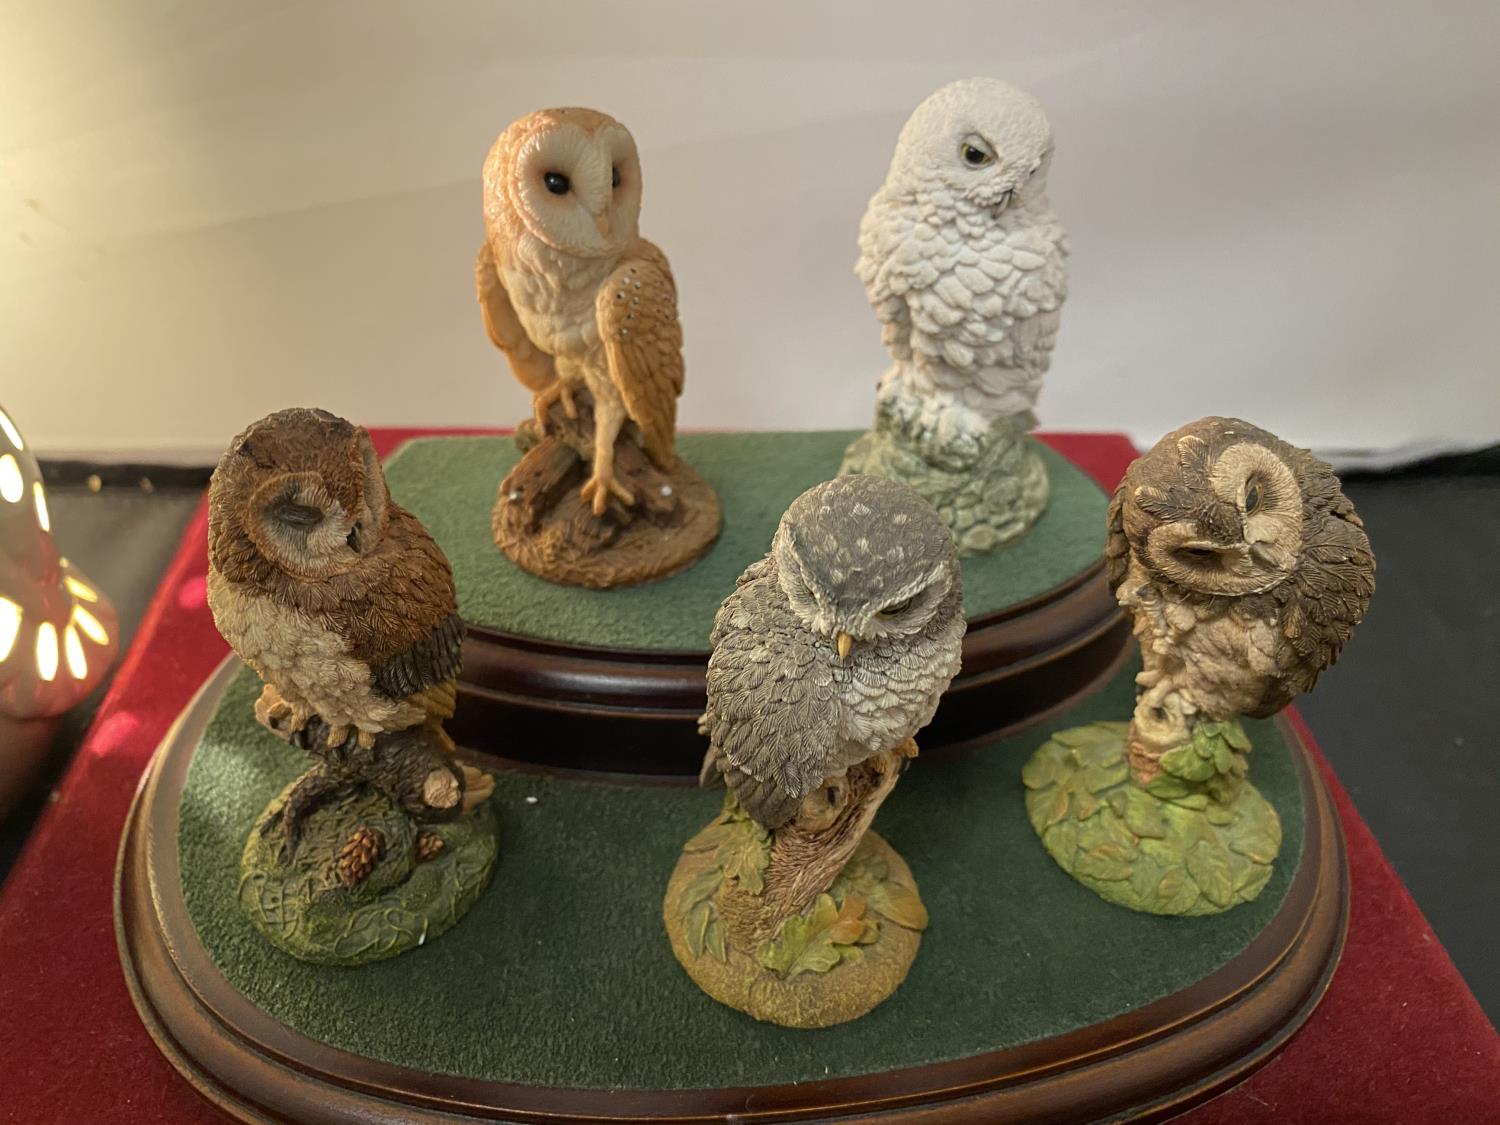 VARIOUS OWL COLLECTION ITEMS TO INLCUDE A LIGHT, A VASE, PLANT POT, FIVE OWLS ON A WOODEN PLINTH AND - Image 7 of 8